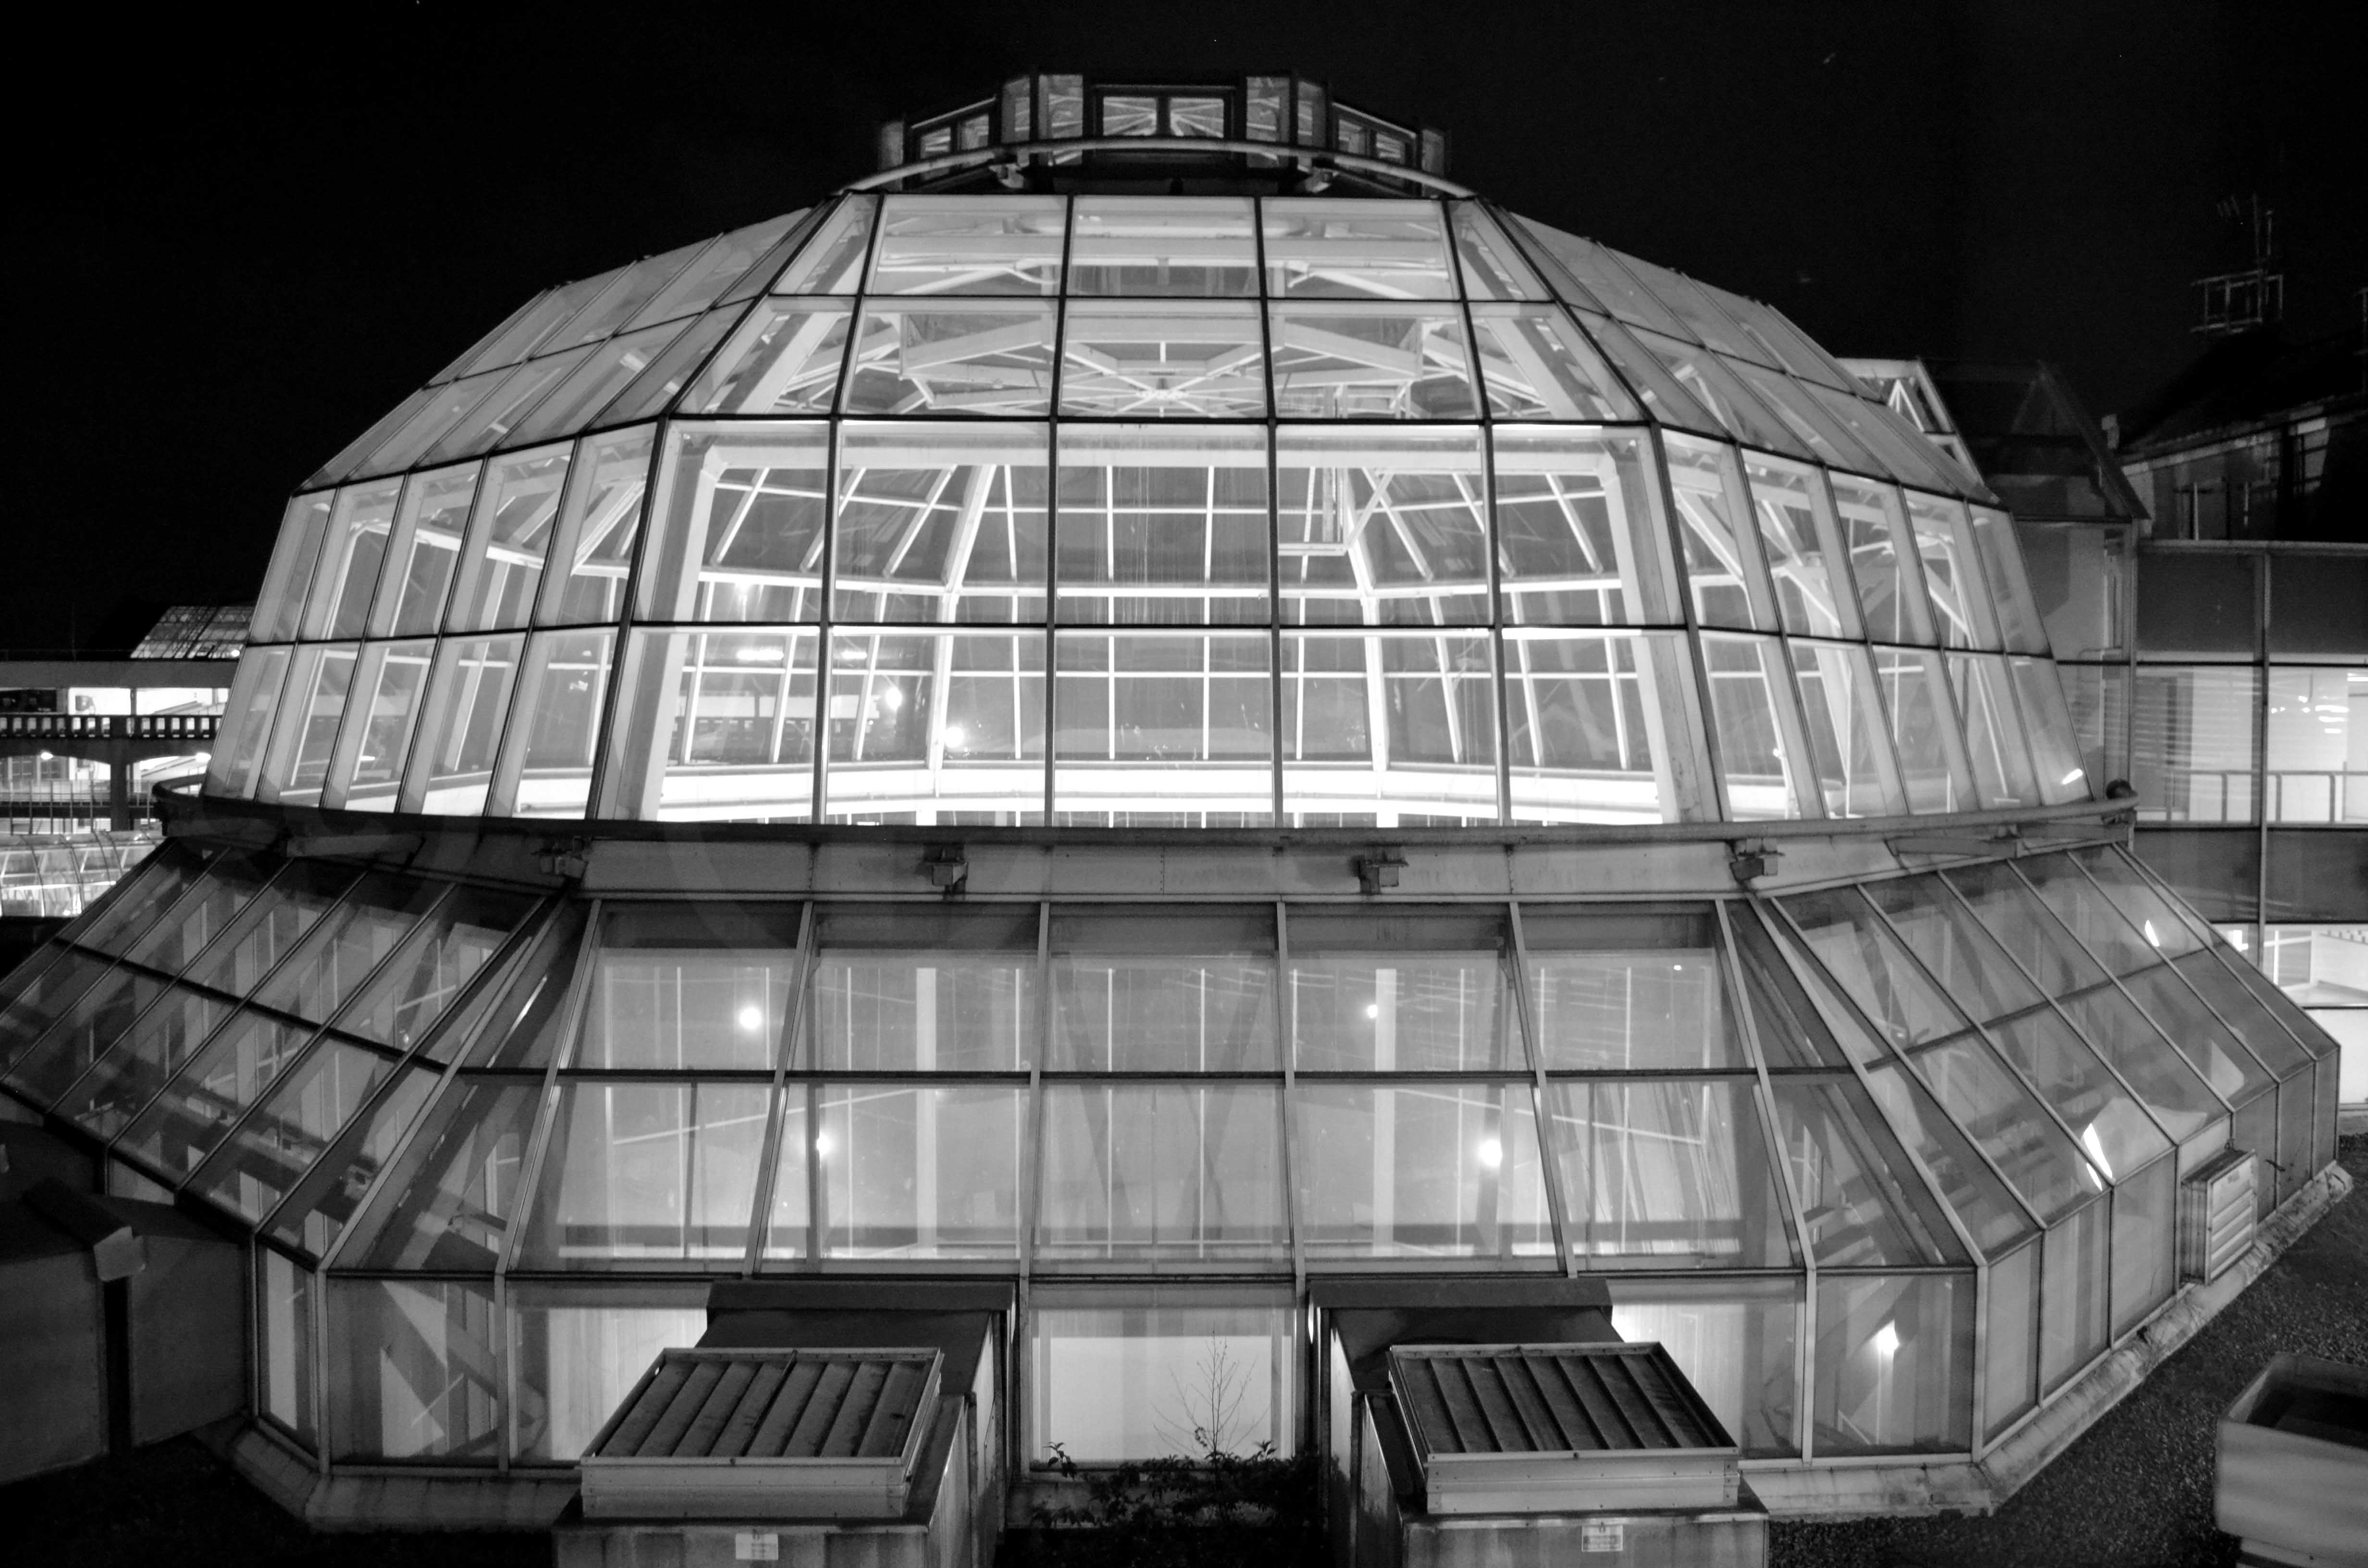 A glass dome made of small windows